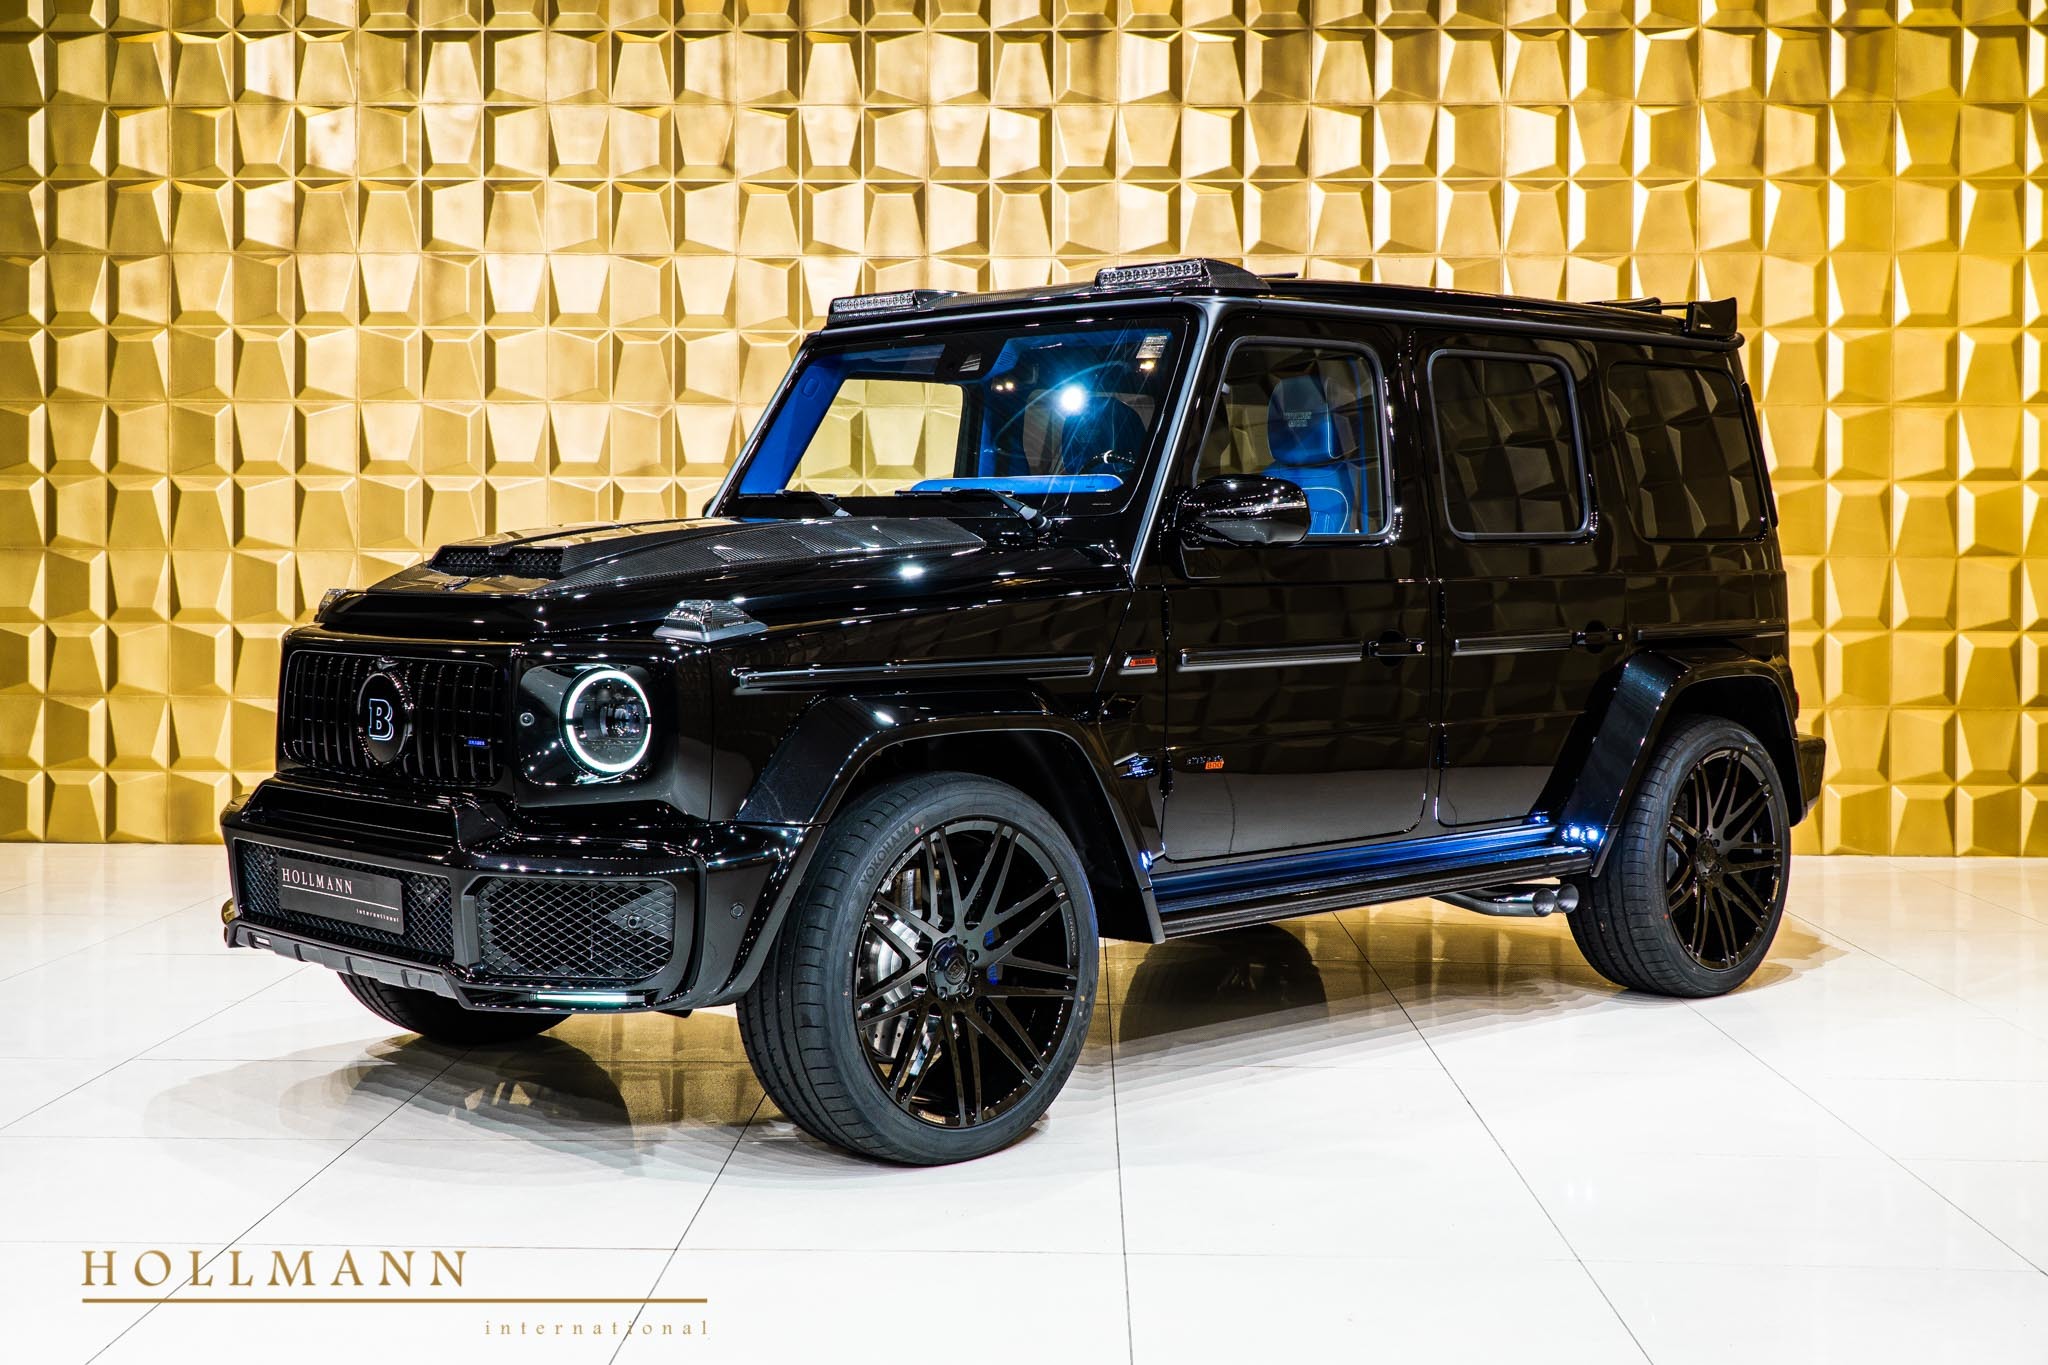 Mercedes Benz G 63 Amg Brabus 800 Luxury Pulse Cars Germany For Sale On Luxurypulse